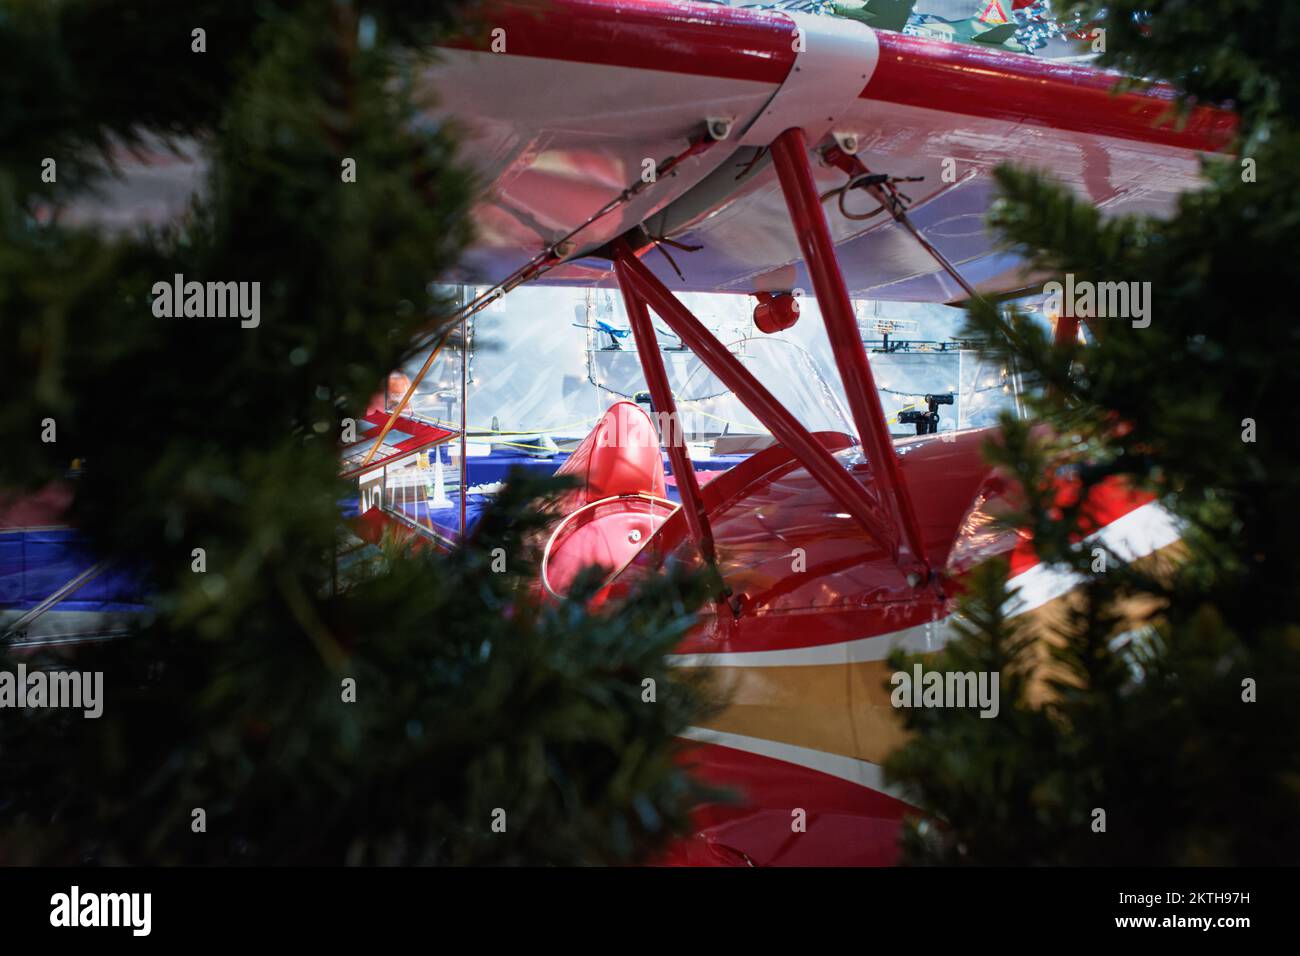 The cockpit of a bright red vintage biplane surrounded by Christmas trees at the Aviation Museum of New Hampshire. Londonderry, New Hampshire. Stock Photo